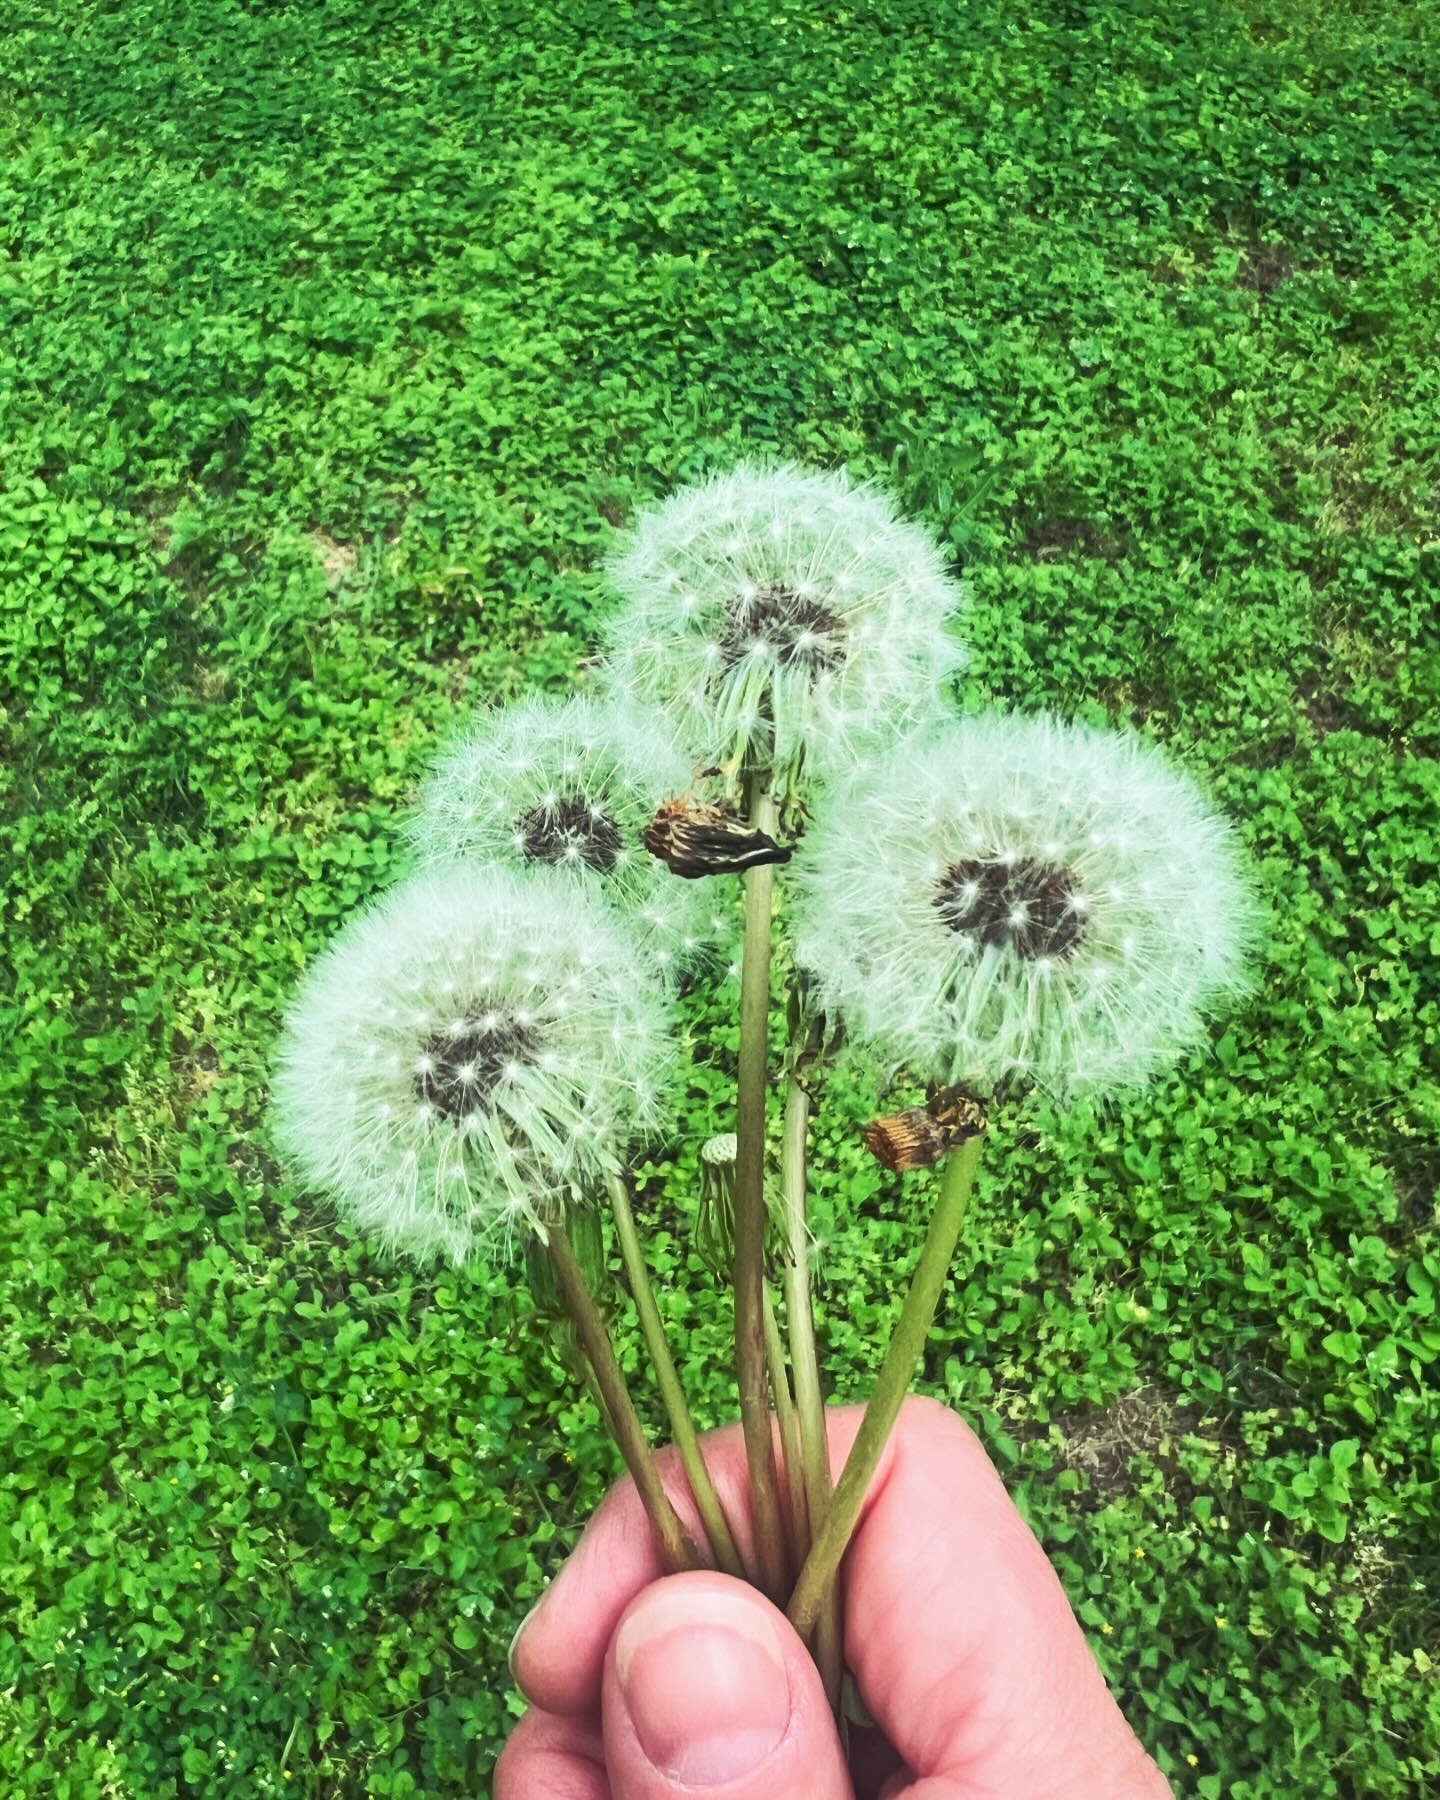 I often share breath prayers practices as a simple way of connecting with your soul and the holy. For the last couple of years, I&rsquo;ve added dandelion prayers to my own practice. As I blow or wave the seeds and watch them spin away around me, I t